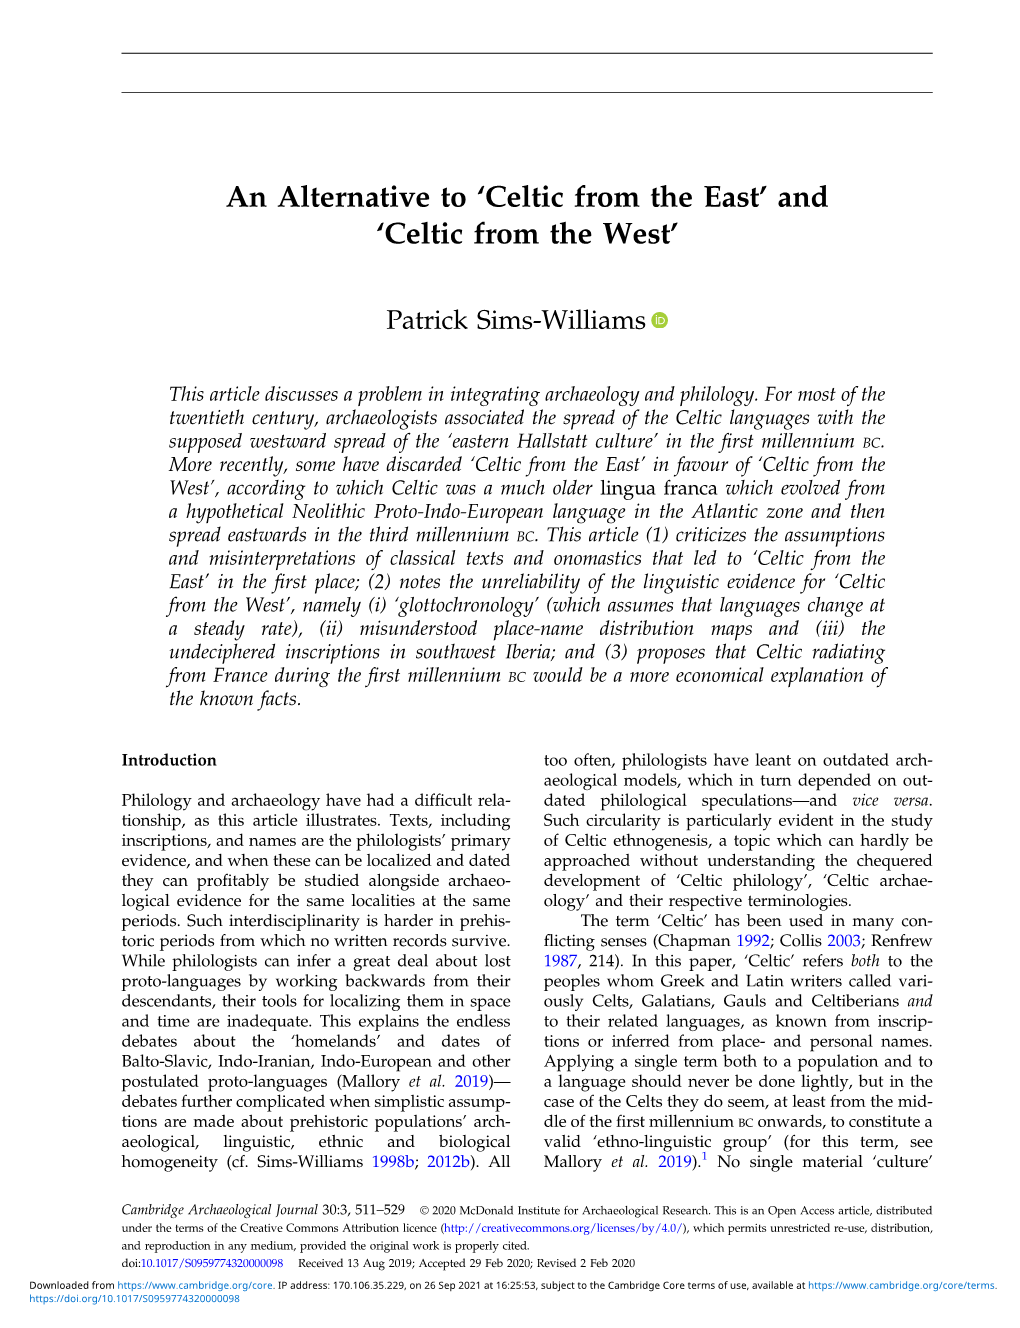 An Alternative to 'Celtic from the East' and 'Celtic from the West'